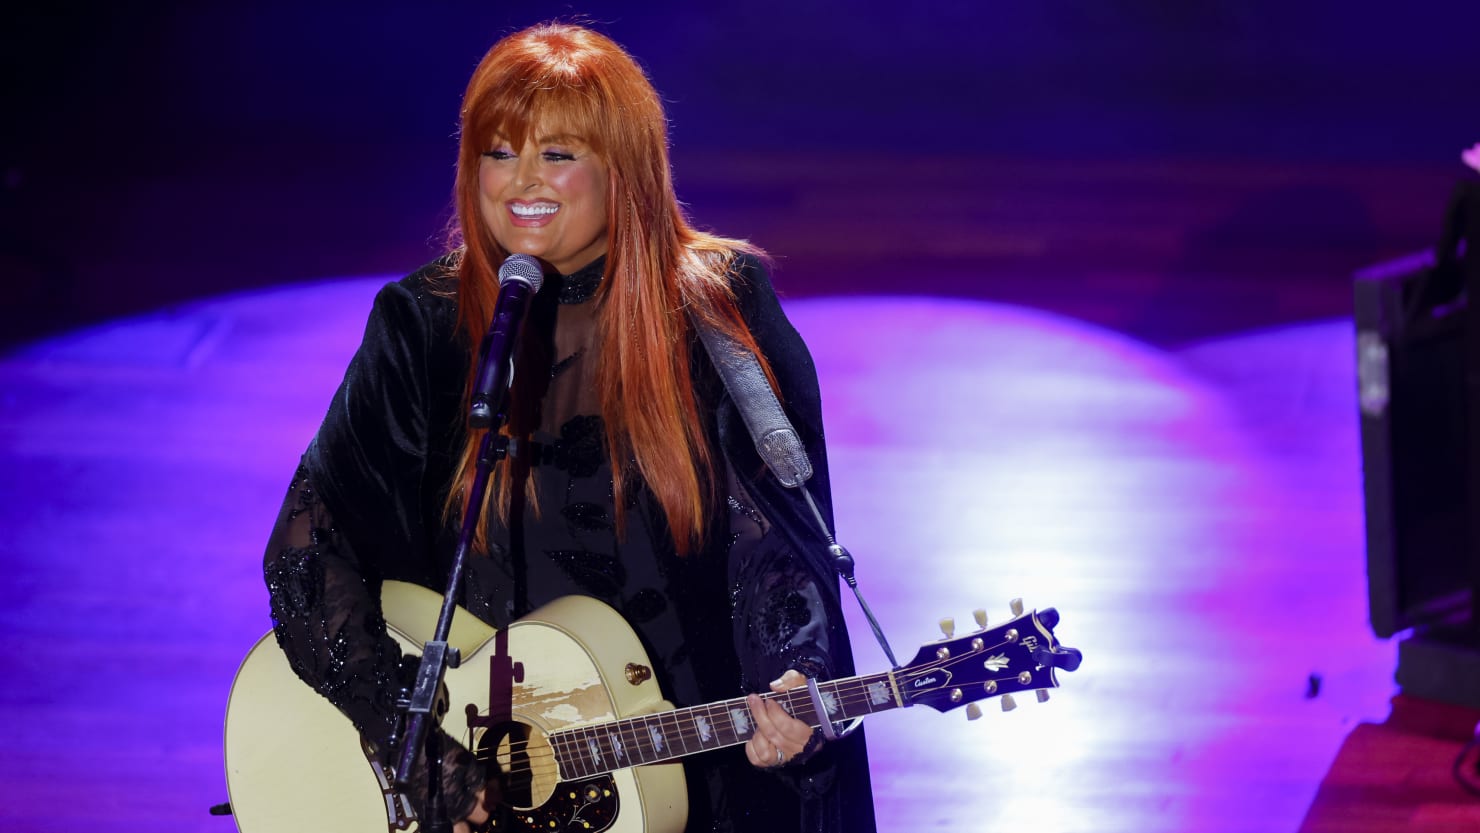 Wynonna Judd Denies Feuding With Sister Ashley Over Their Mom’s Will – The Daily Beast